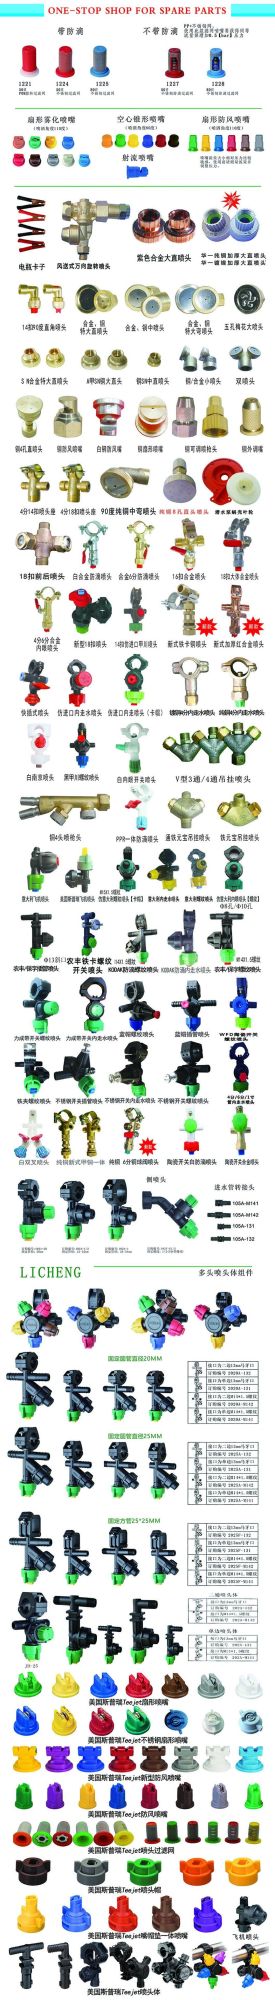 Stainless Steel Sprayer Parts Farm Battery Agricultural Pump Electric Fogging Machine Nozzle